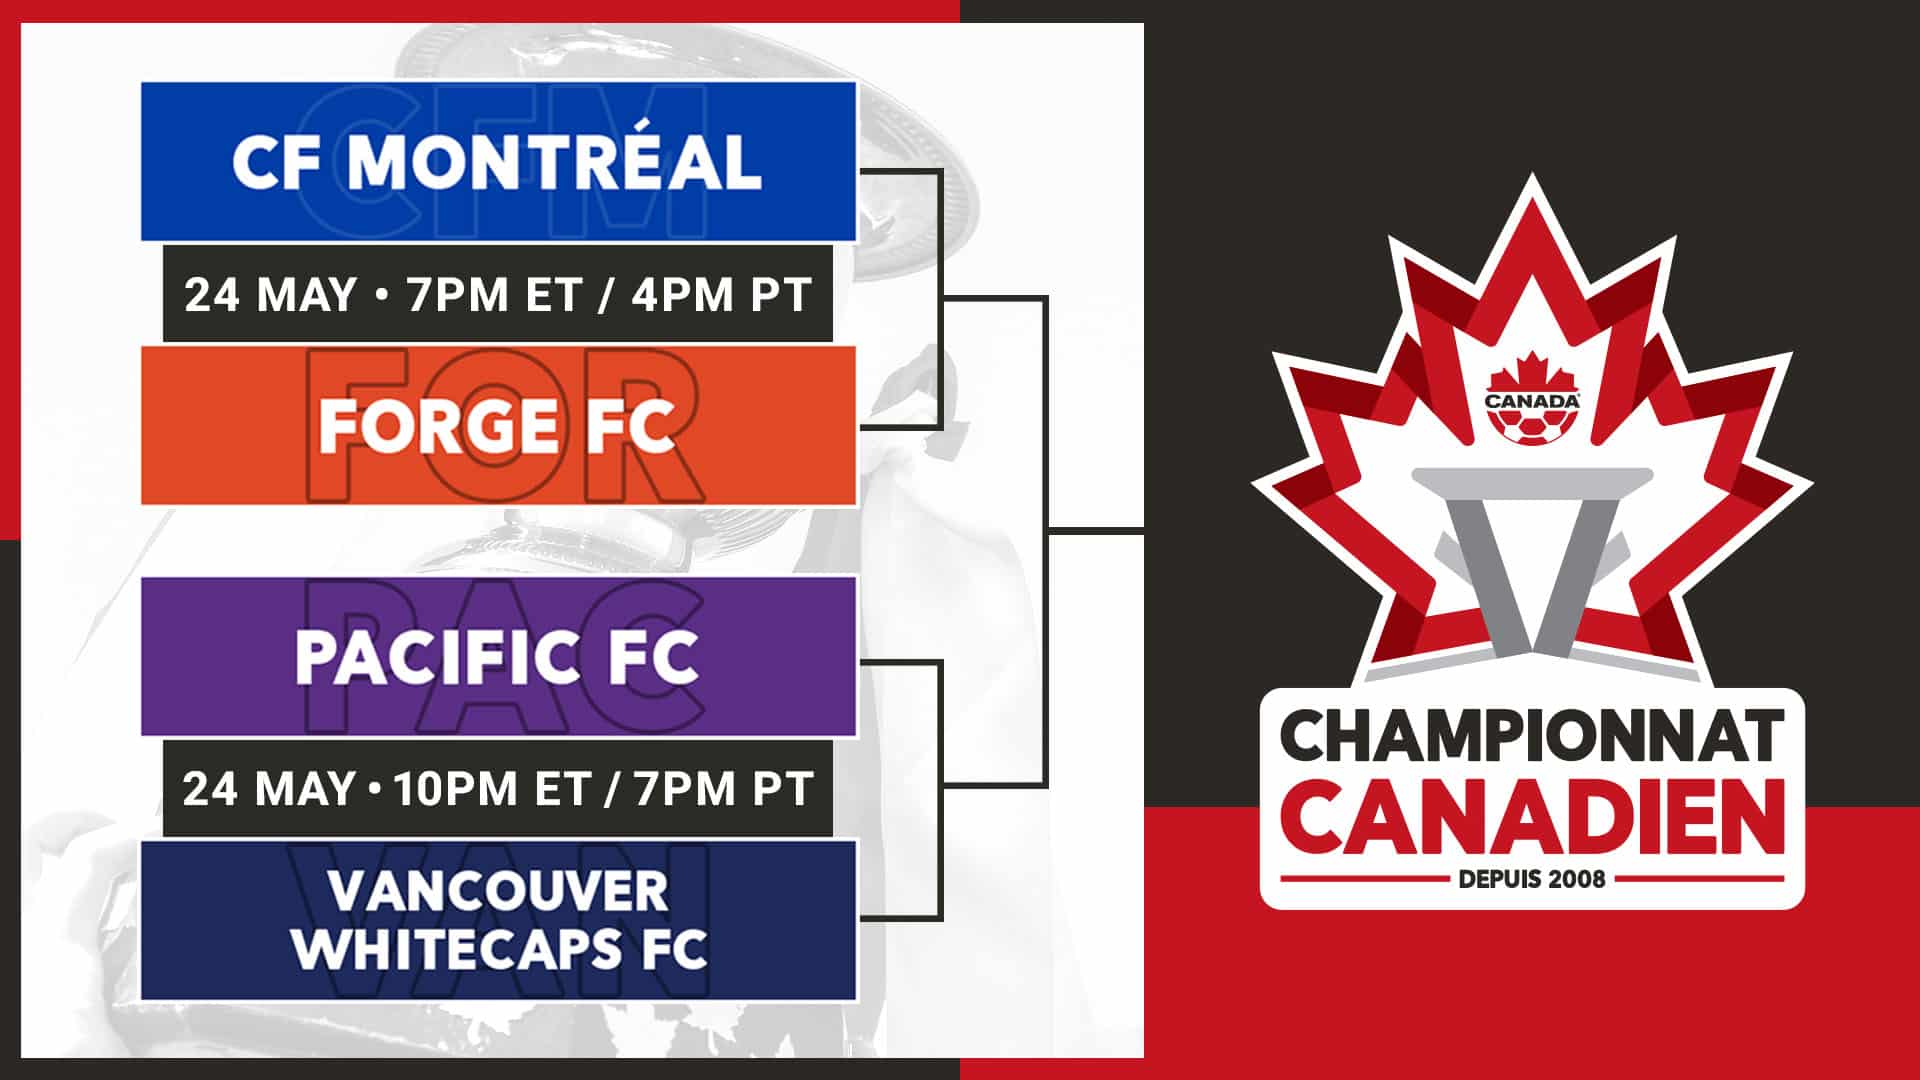 The Canadian Championship semifinals are set for Wednesday night